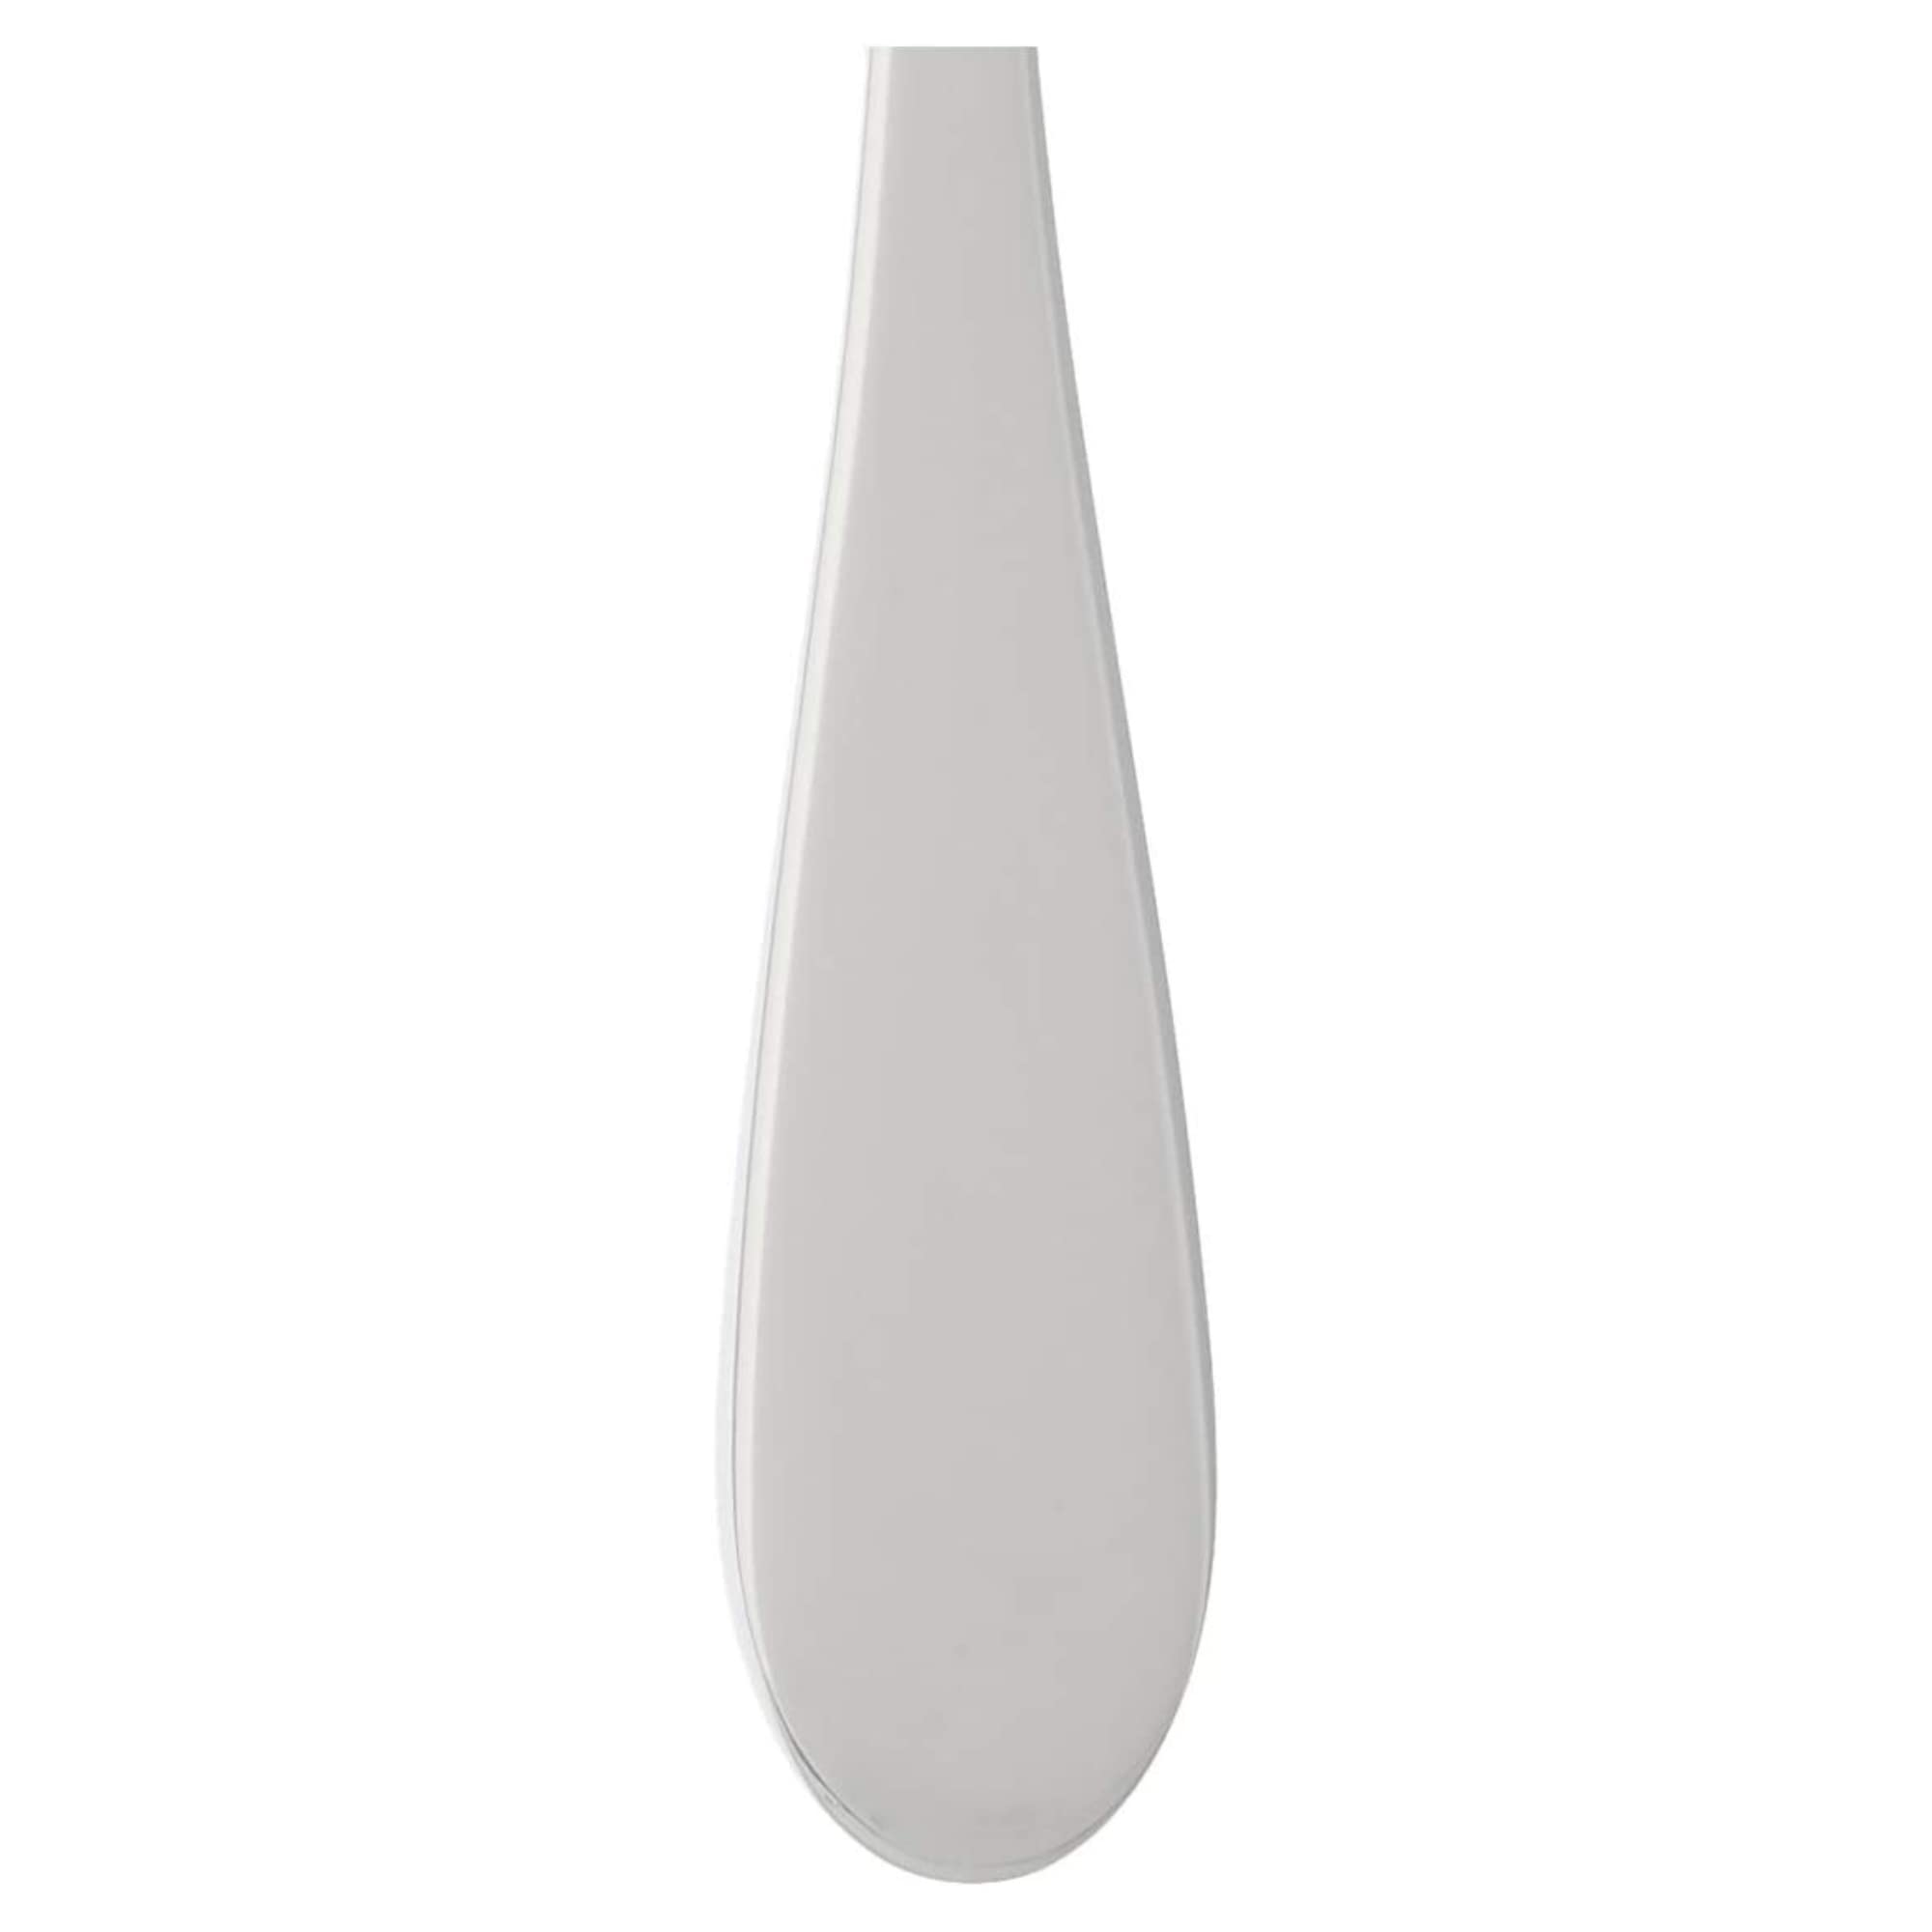 Knork Original Forged, Matte XL Serving Spoon, Extra Large 2 Piece Set, Silver